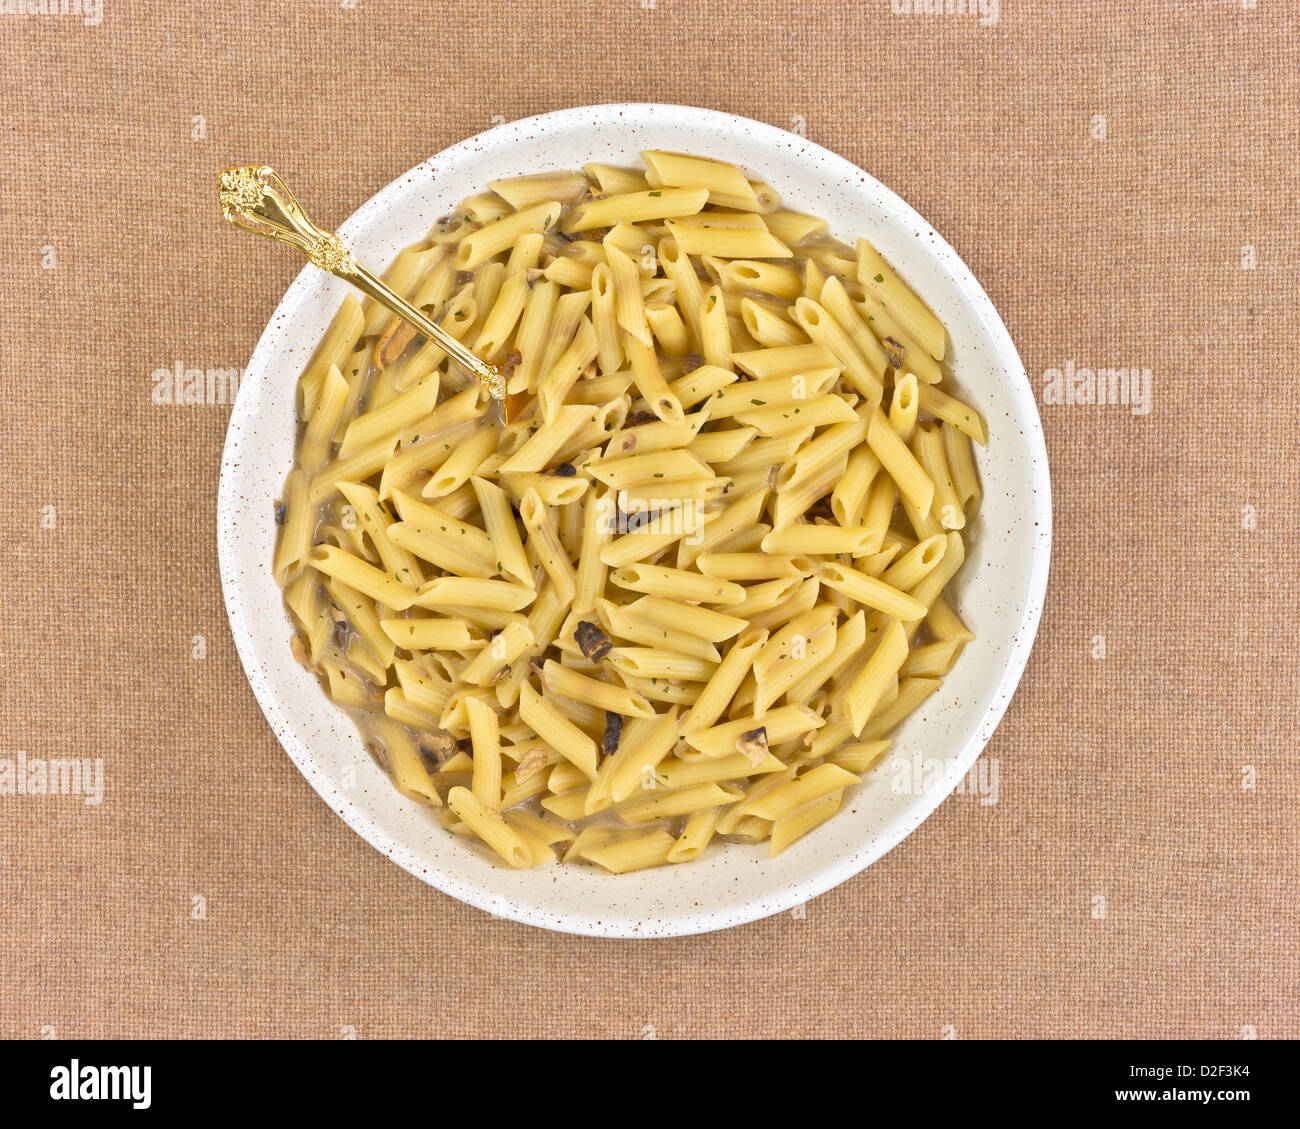 Large serving of penne Italian pasta with gold spoon on a tan cloth background. Stock Photo